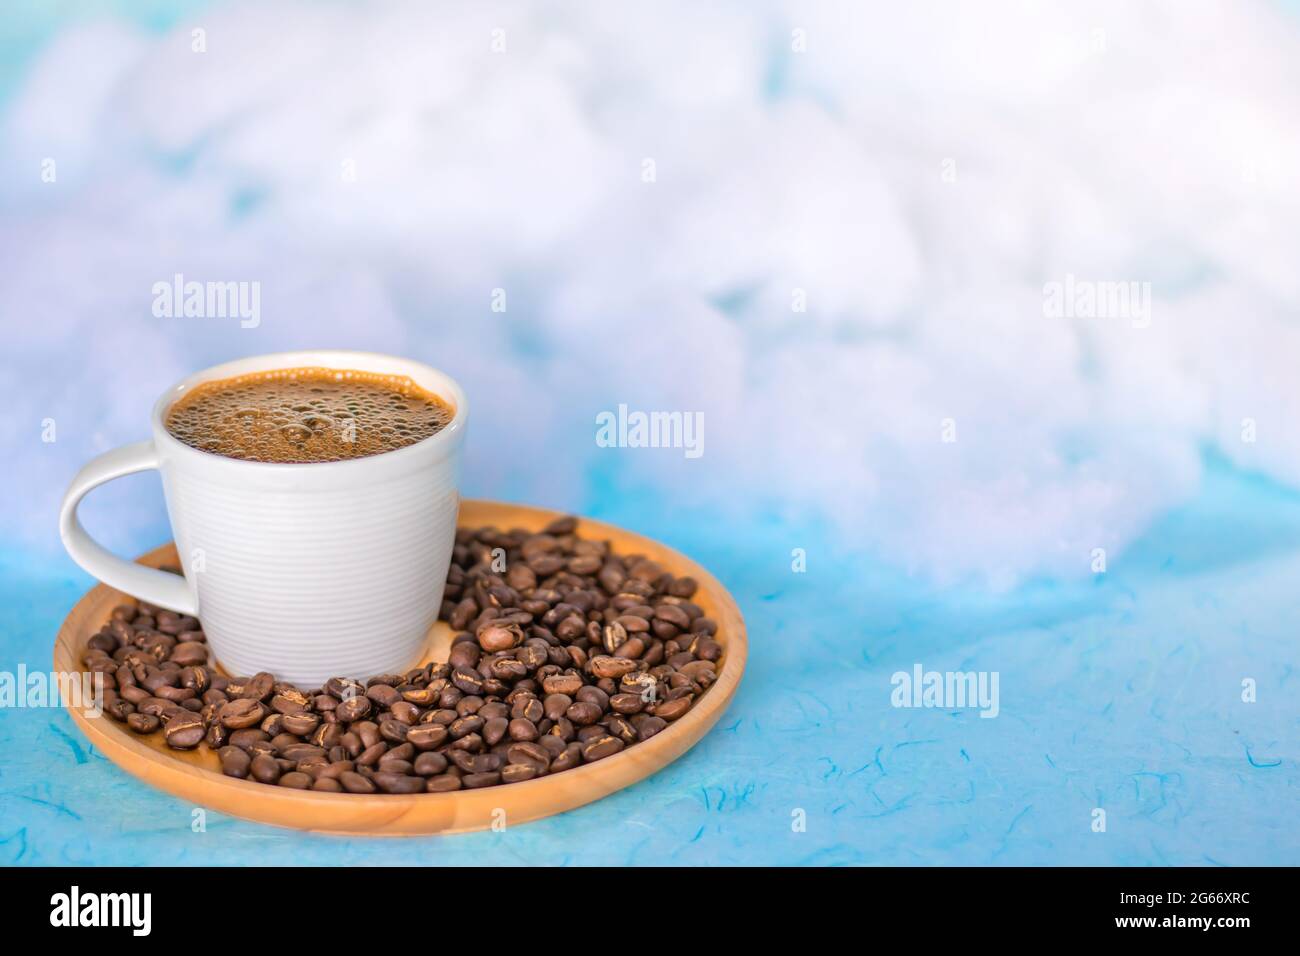 Cup of coffee and coffee beans on a round wooden tray, floating in the sky with white clouds. Copy space. Stock Photo